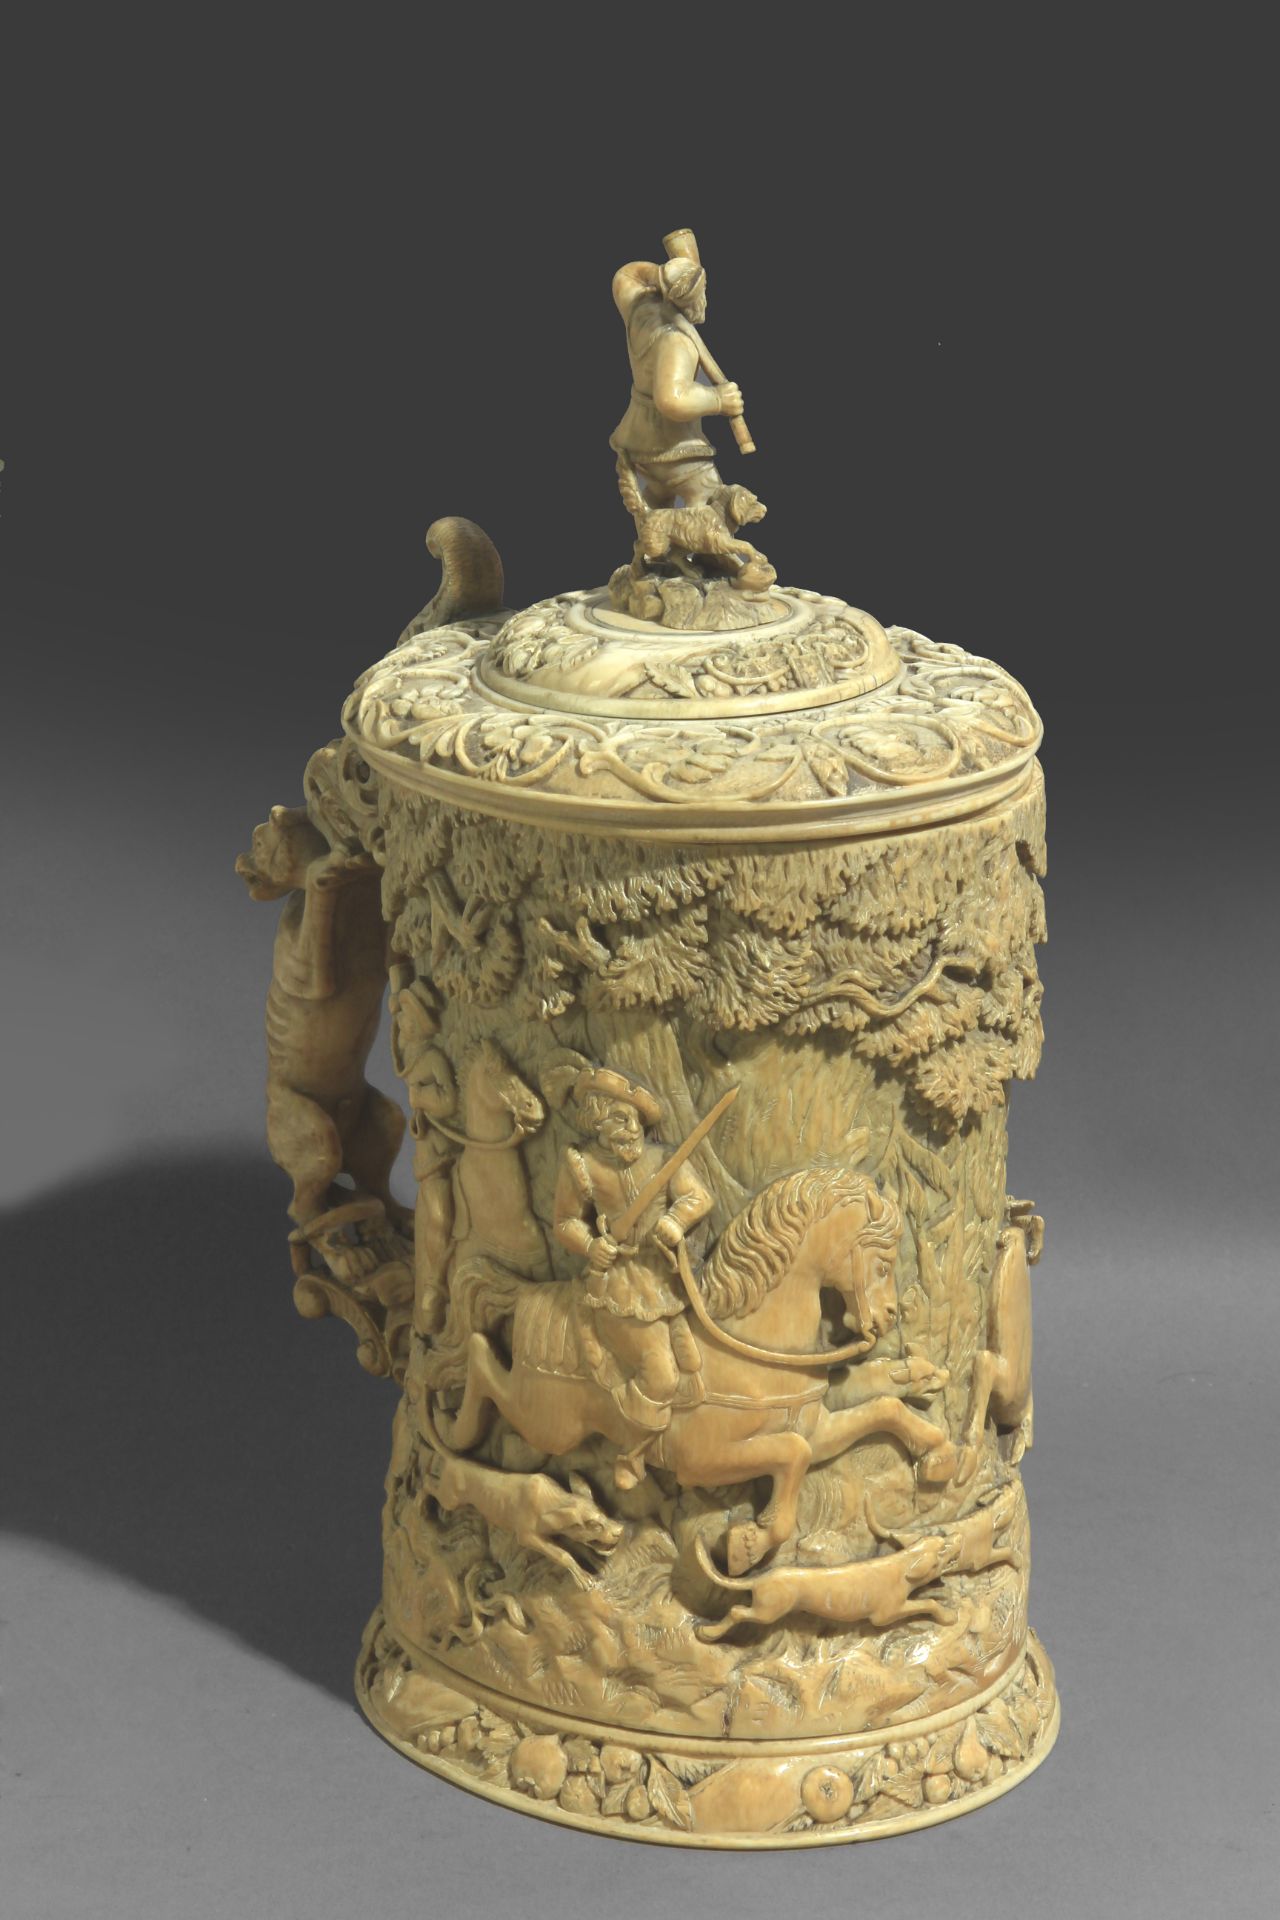 Early 18th century possibly German tankard - Image 14 of 14